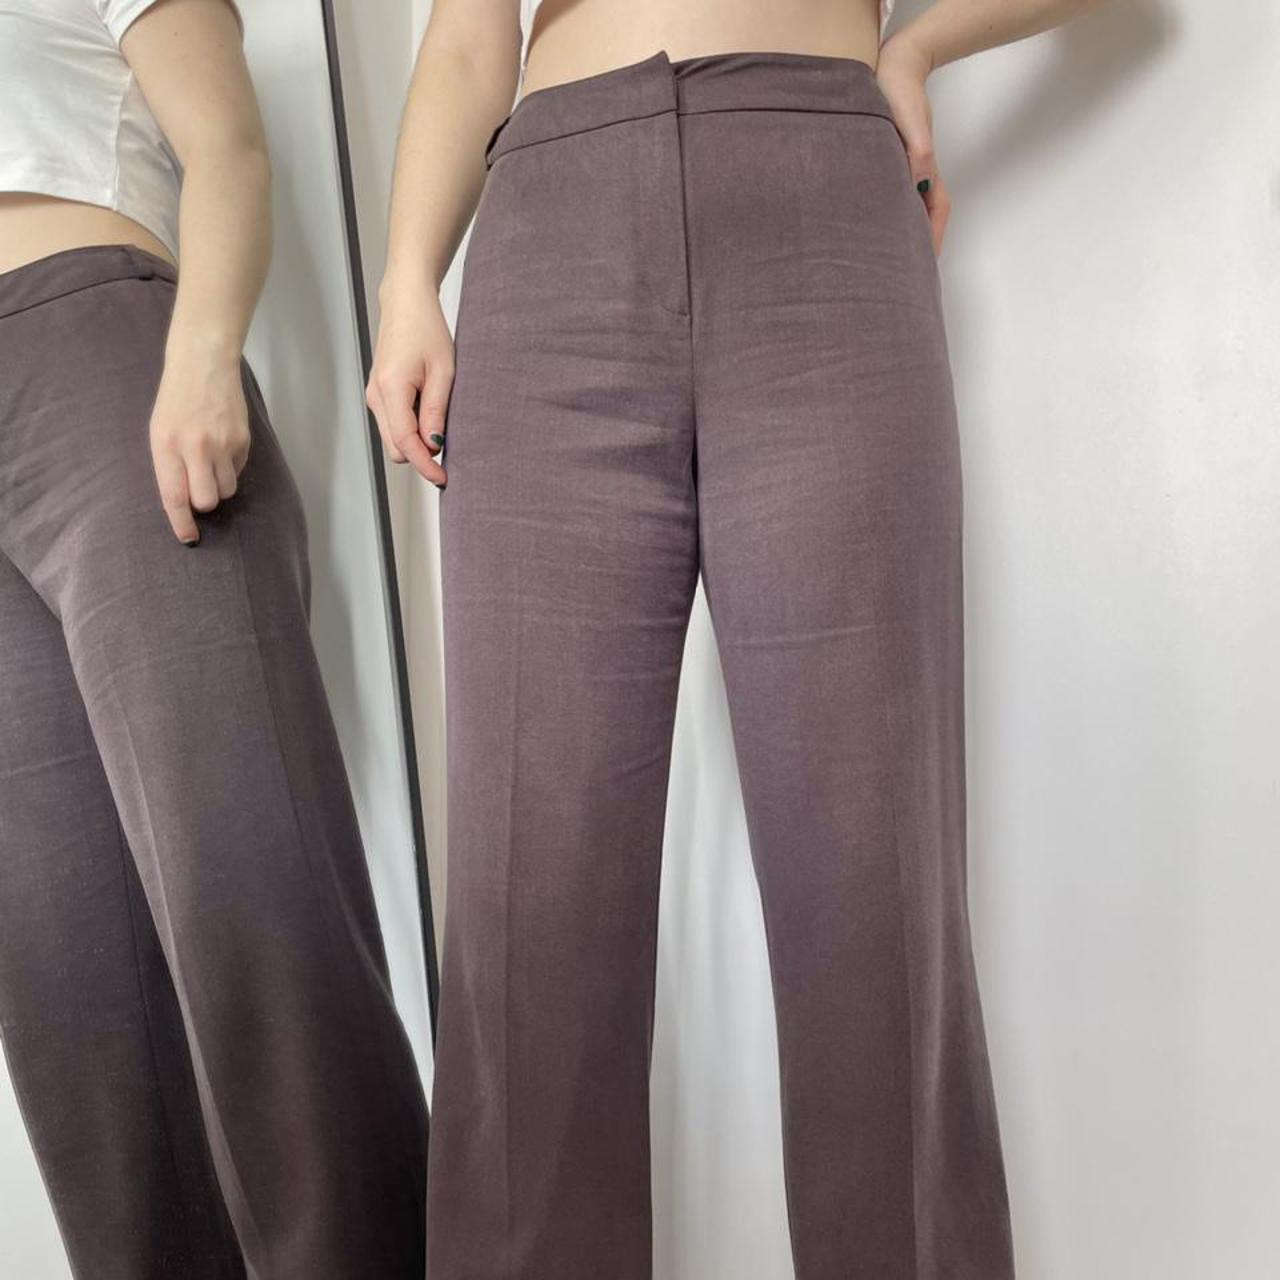 Product Image 1 - Petite flared trousers

In excellent vintage